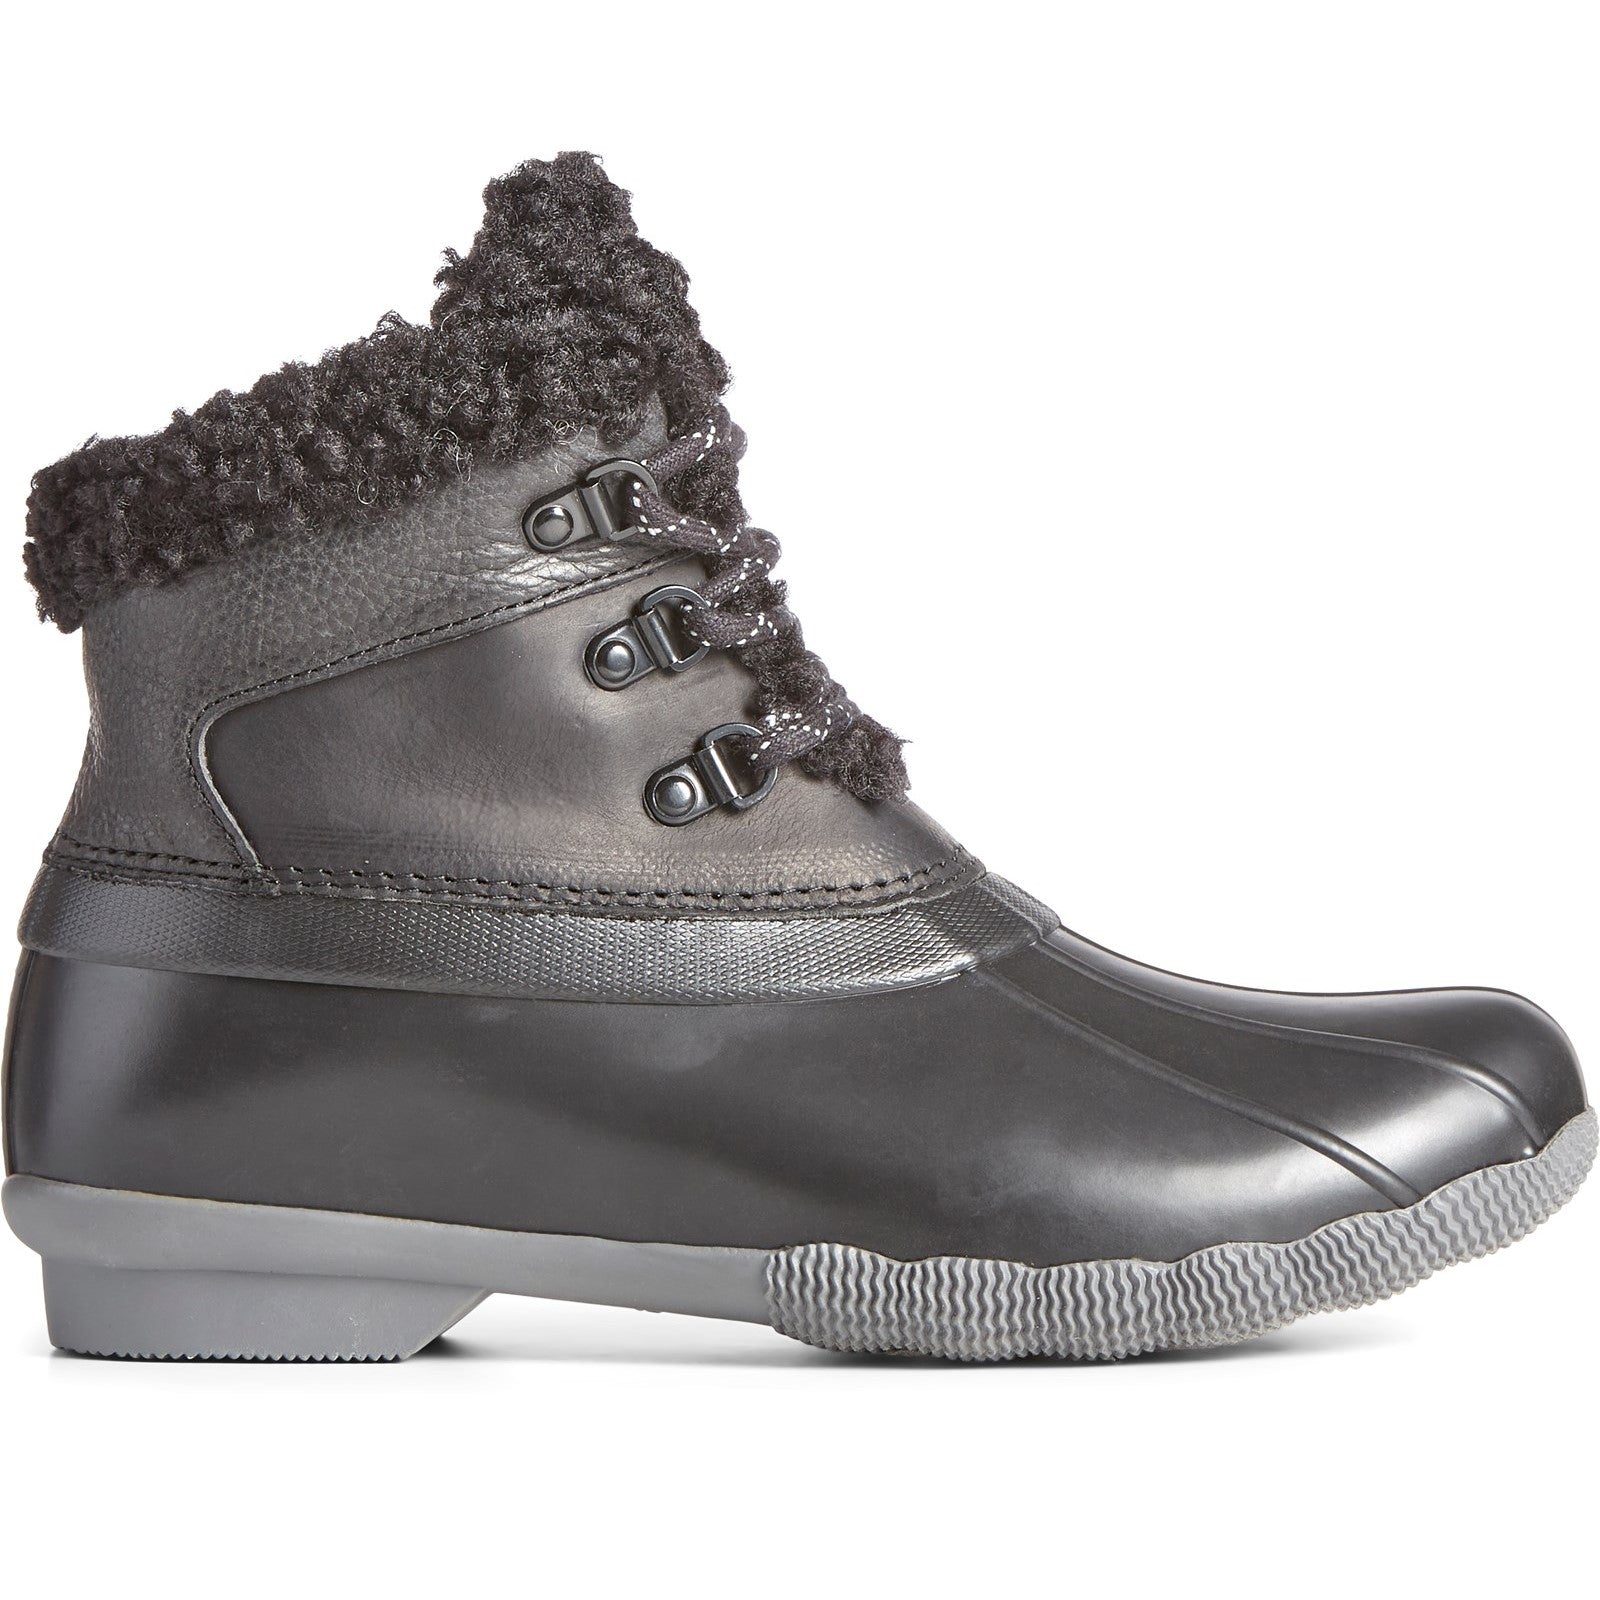 Sperry Womens Saltwater Alpine Ankle Boots - Black